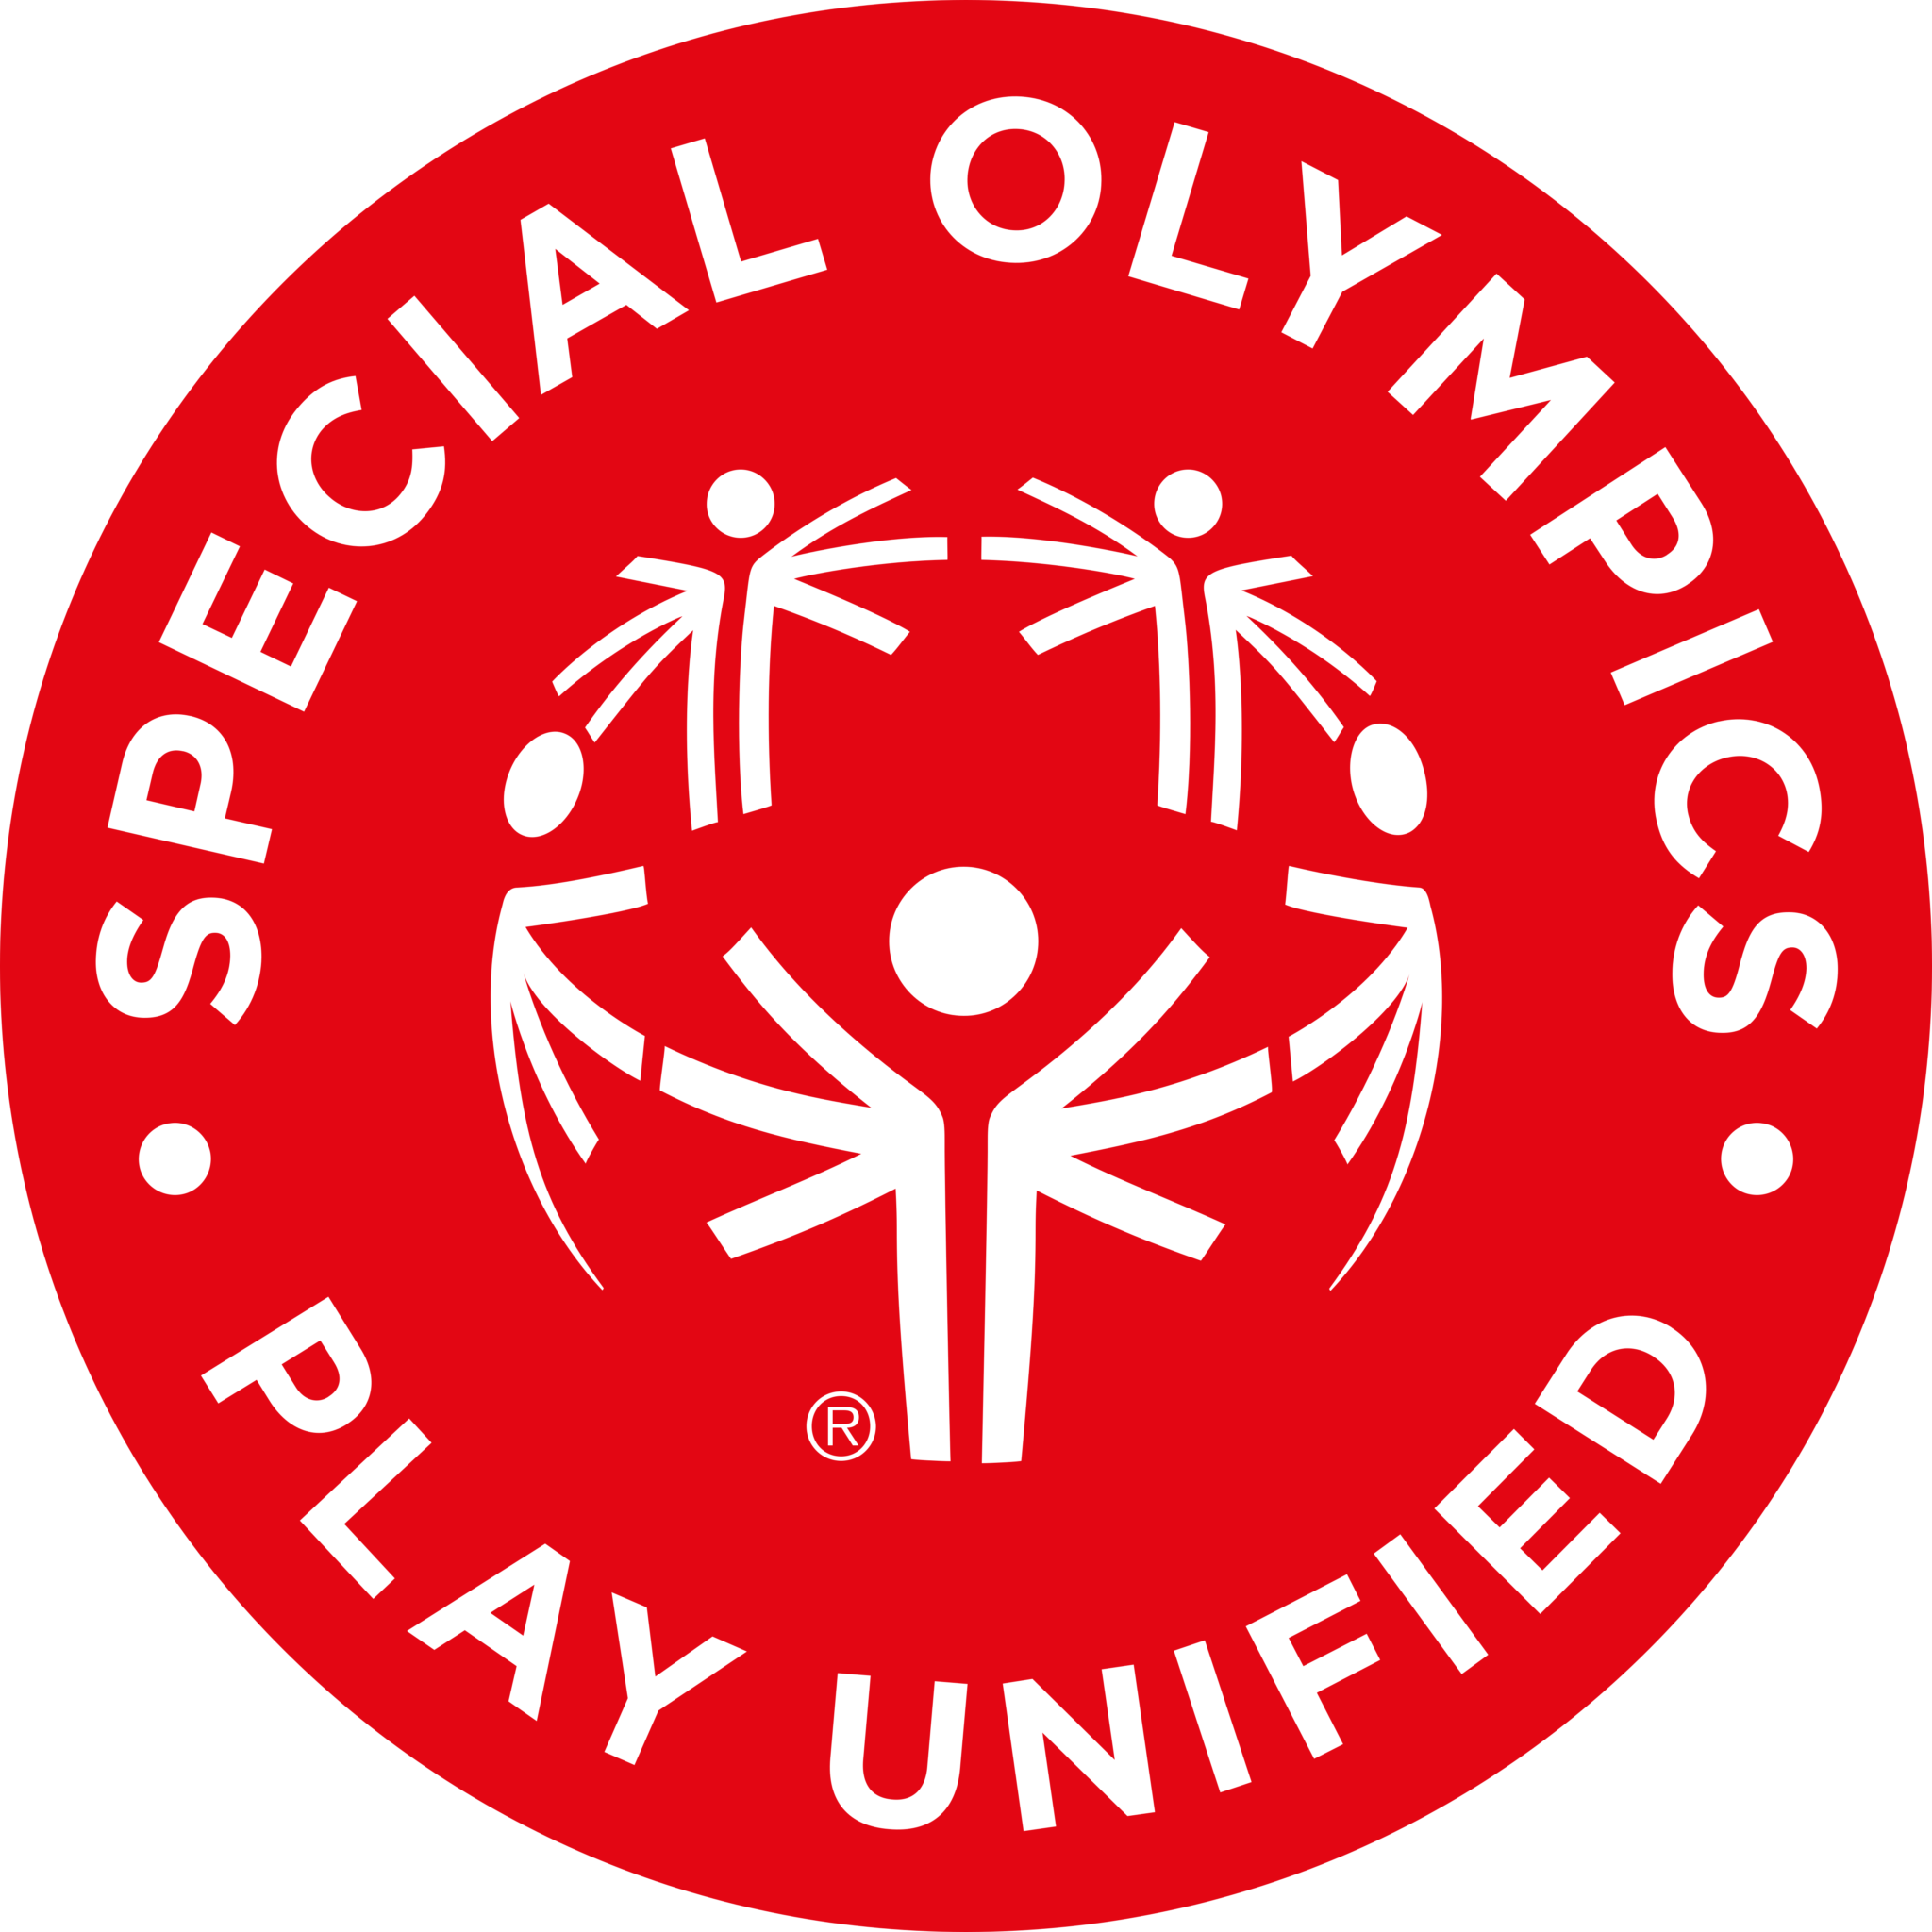 Special Olympics Play Unified Logos Download